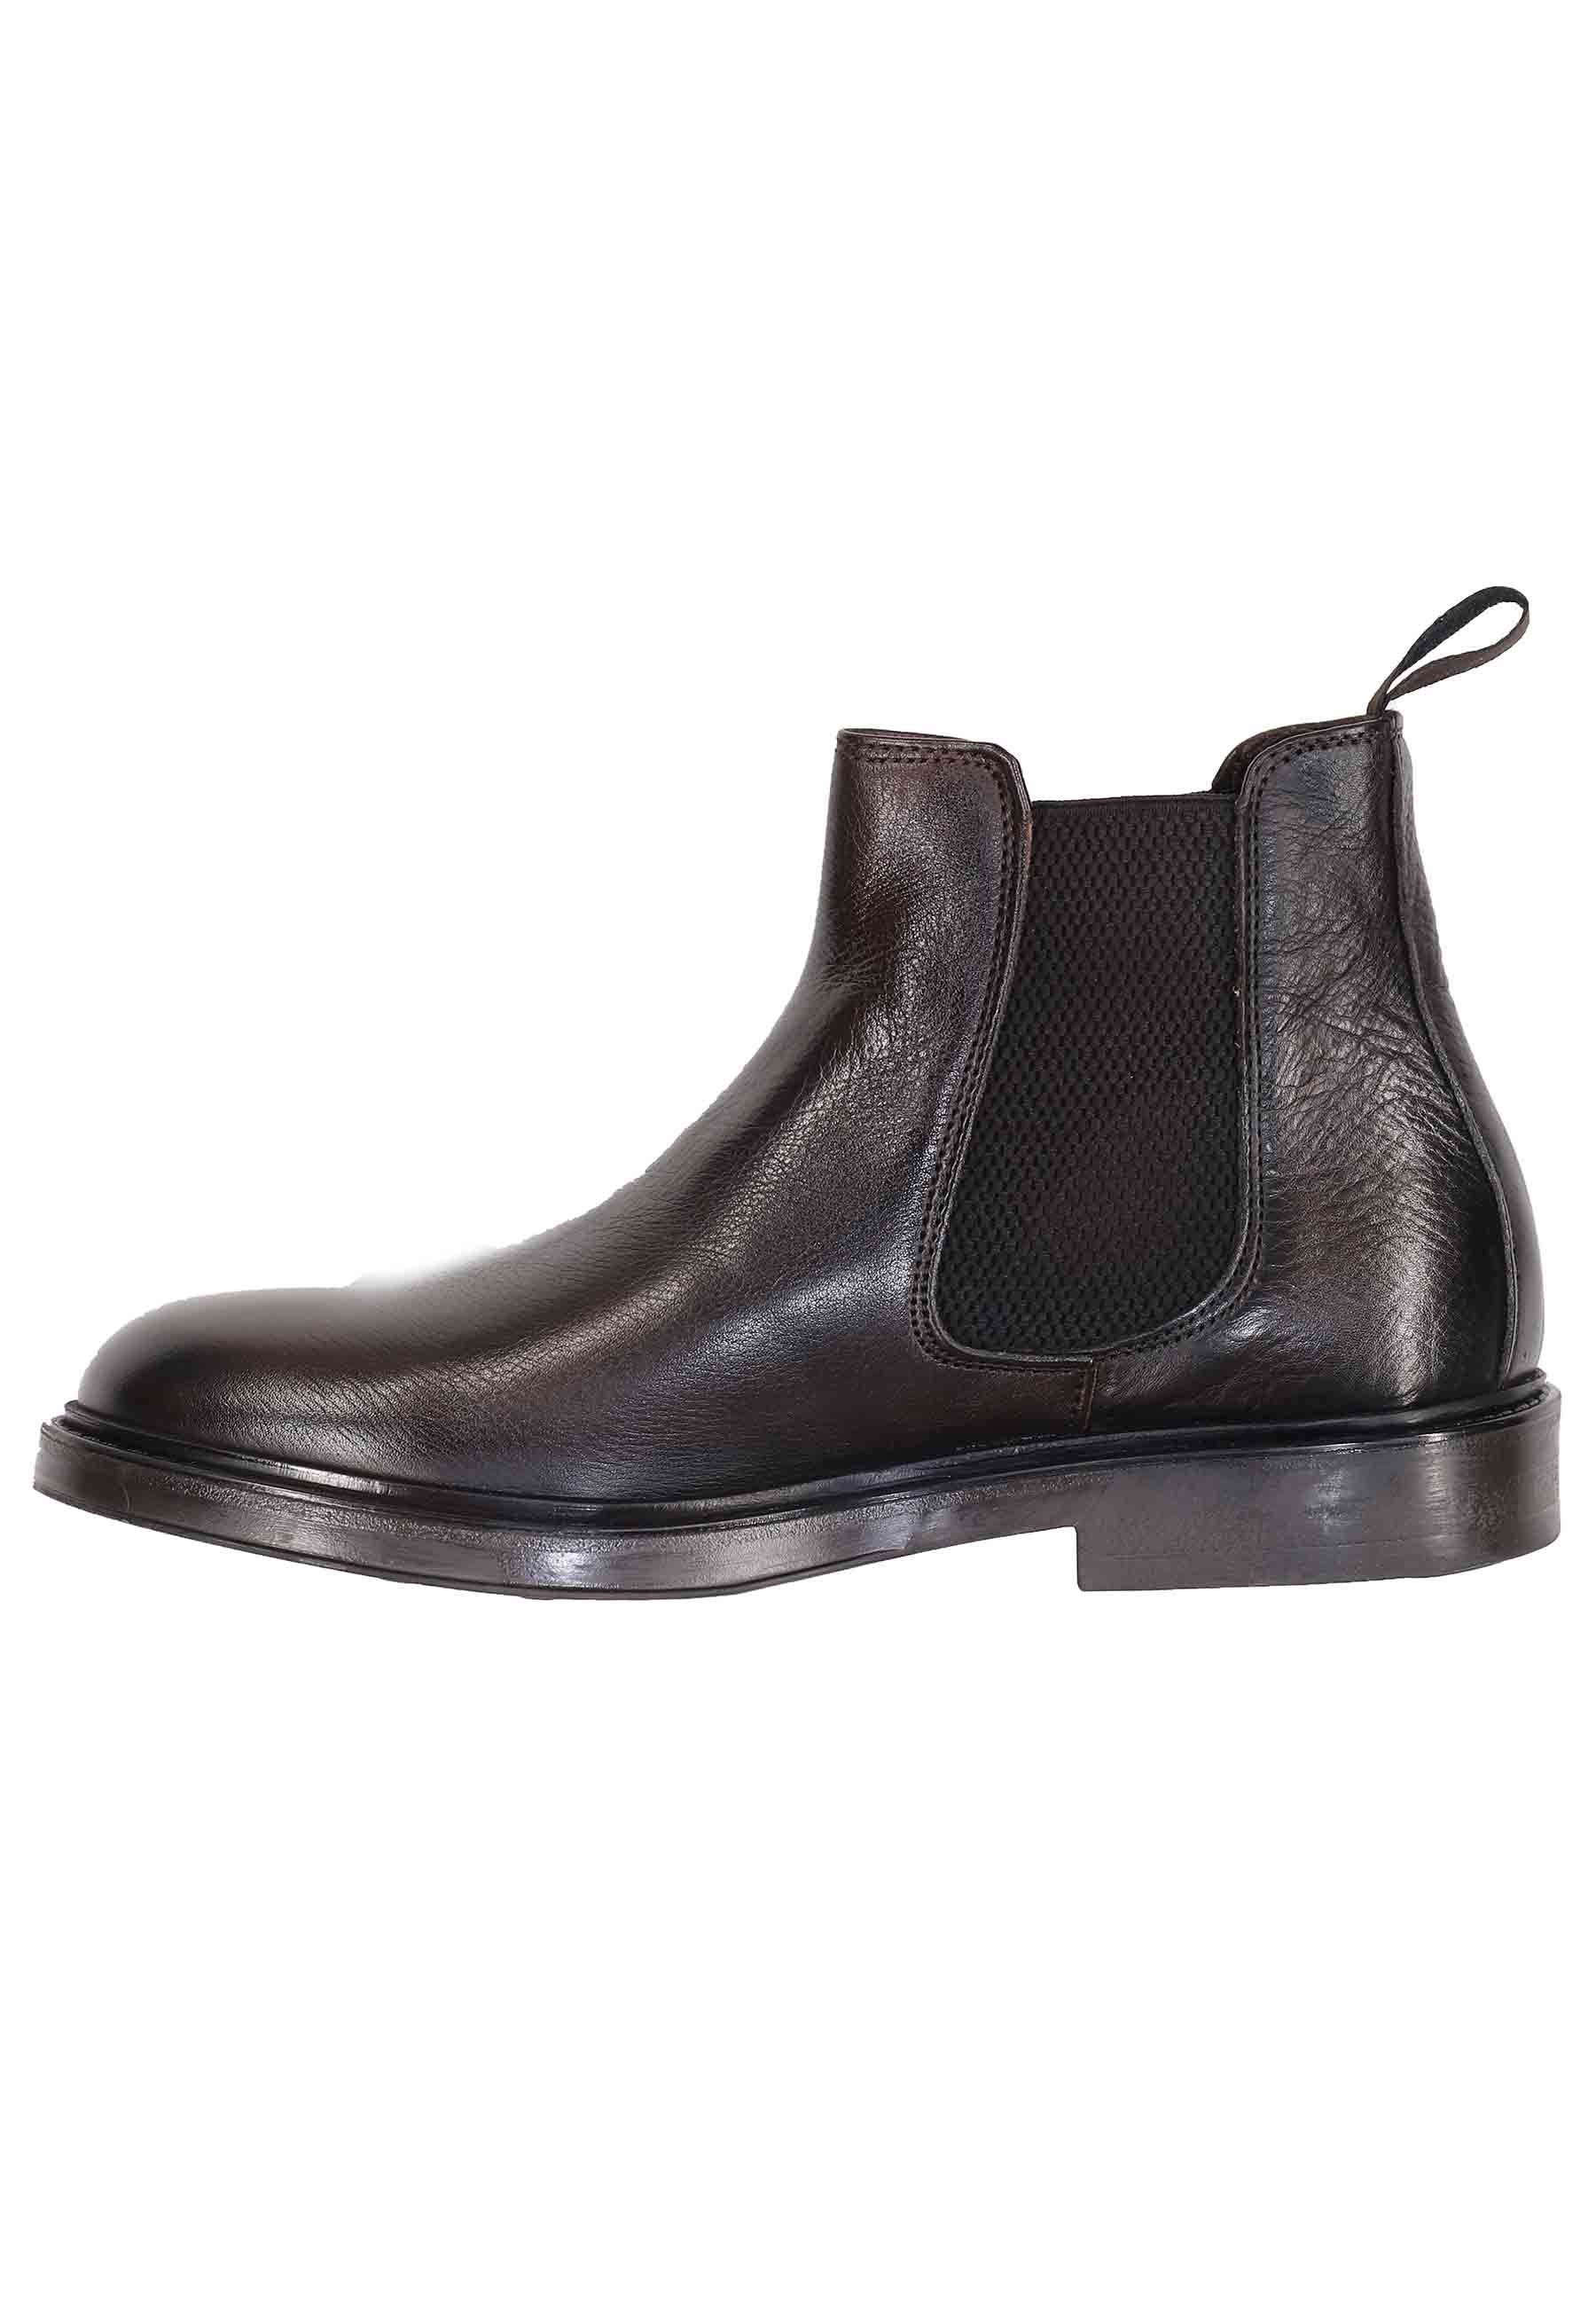 Bealtles ankle boots in dark brown leather with round toe rubber sole